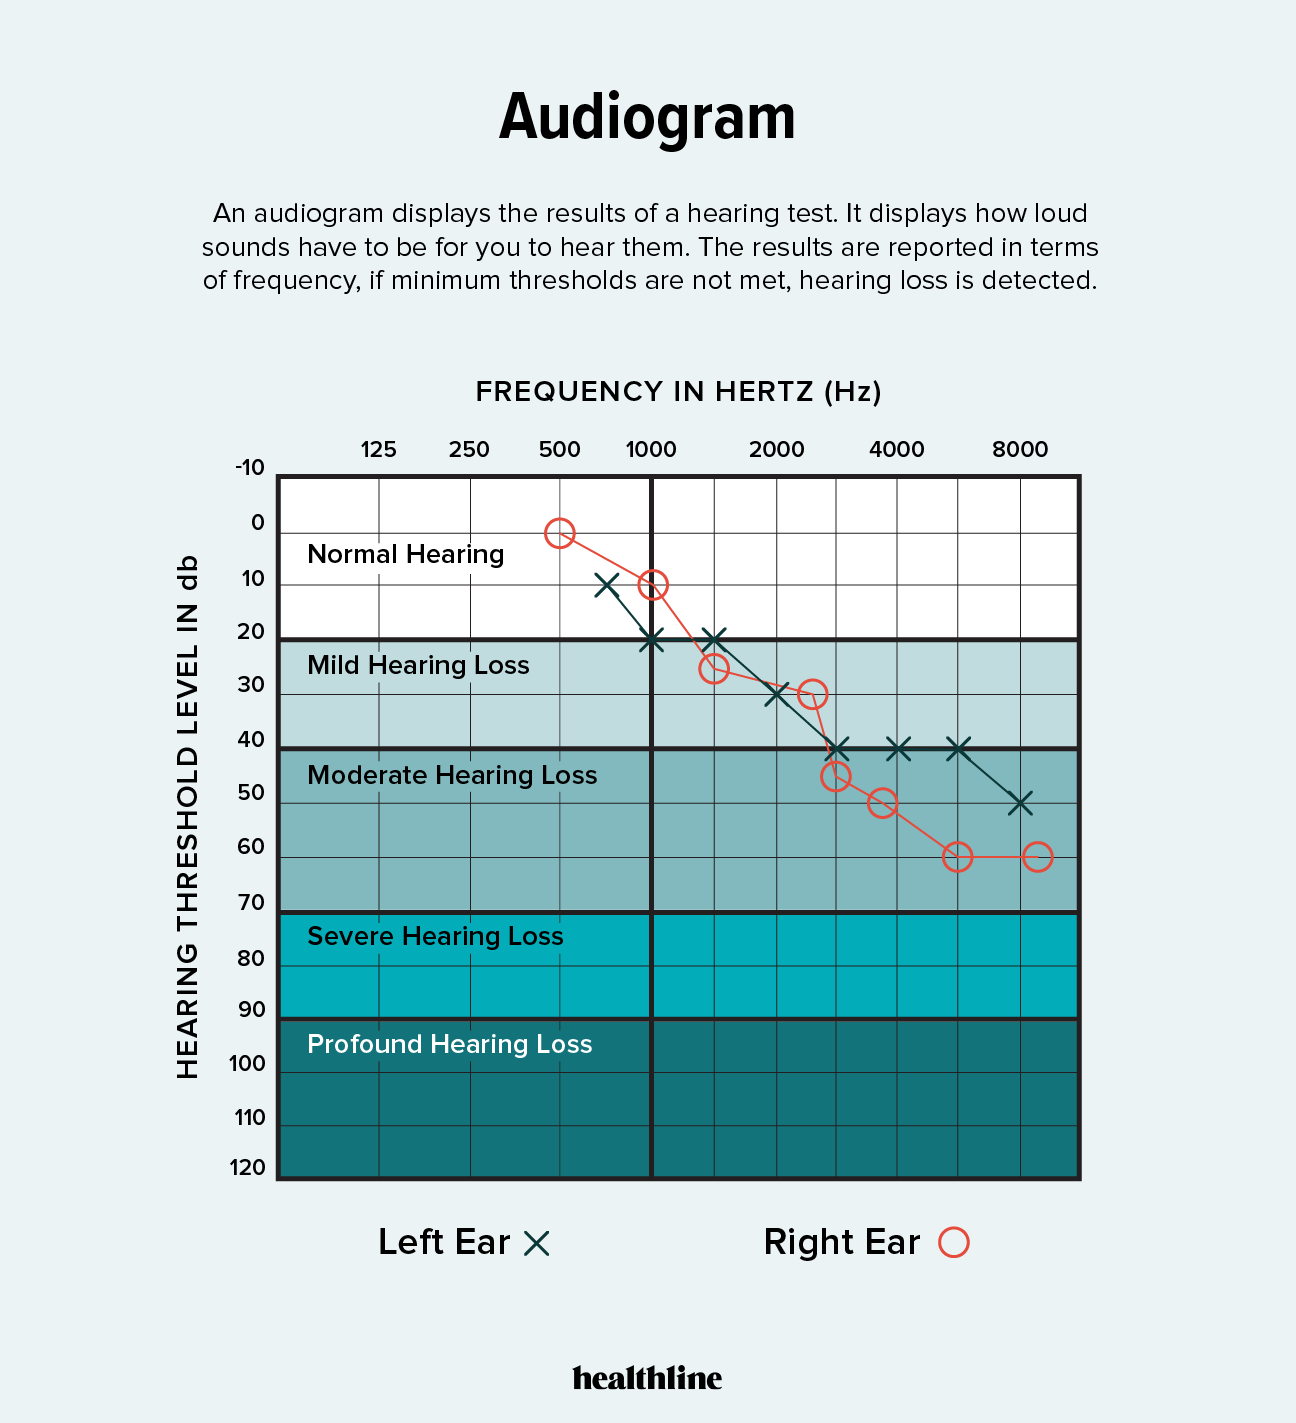 Is this still the correct way on how to interpret an audio